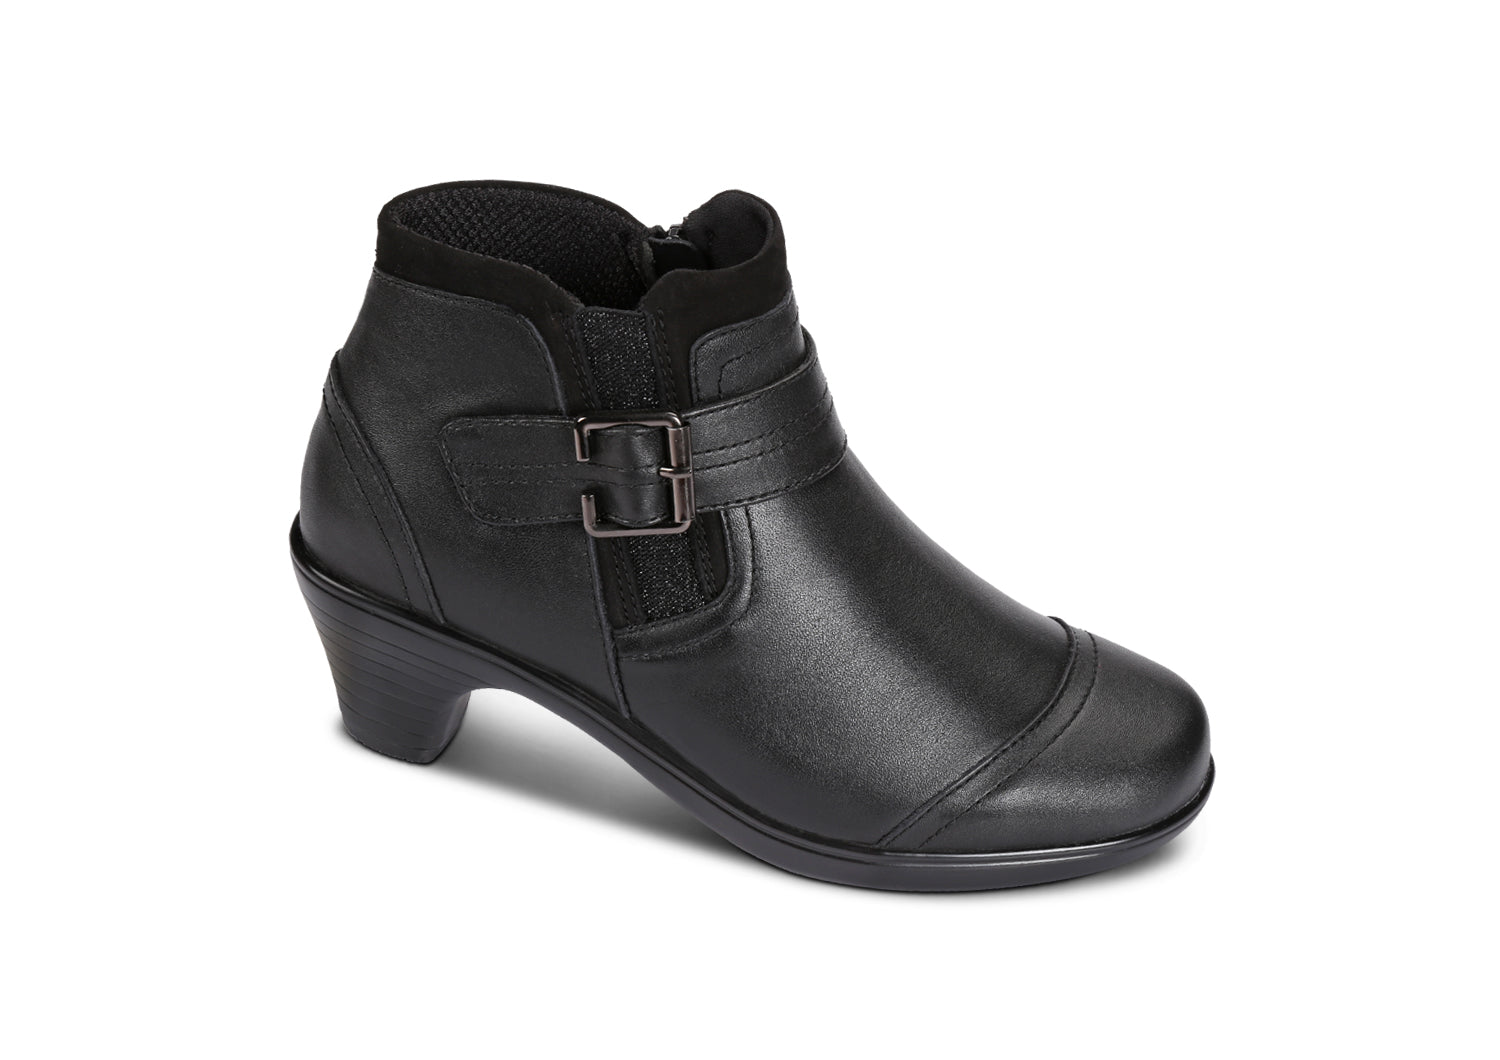 JOLENE - BLACK LOW HEEL ANKLE BOOT | Smith's Shoes